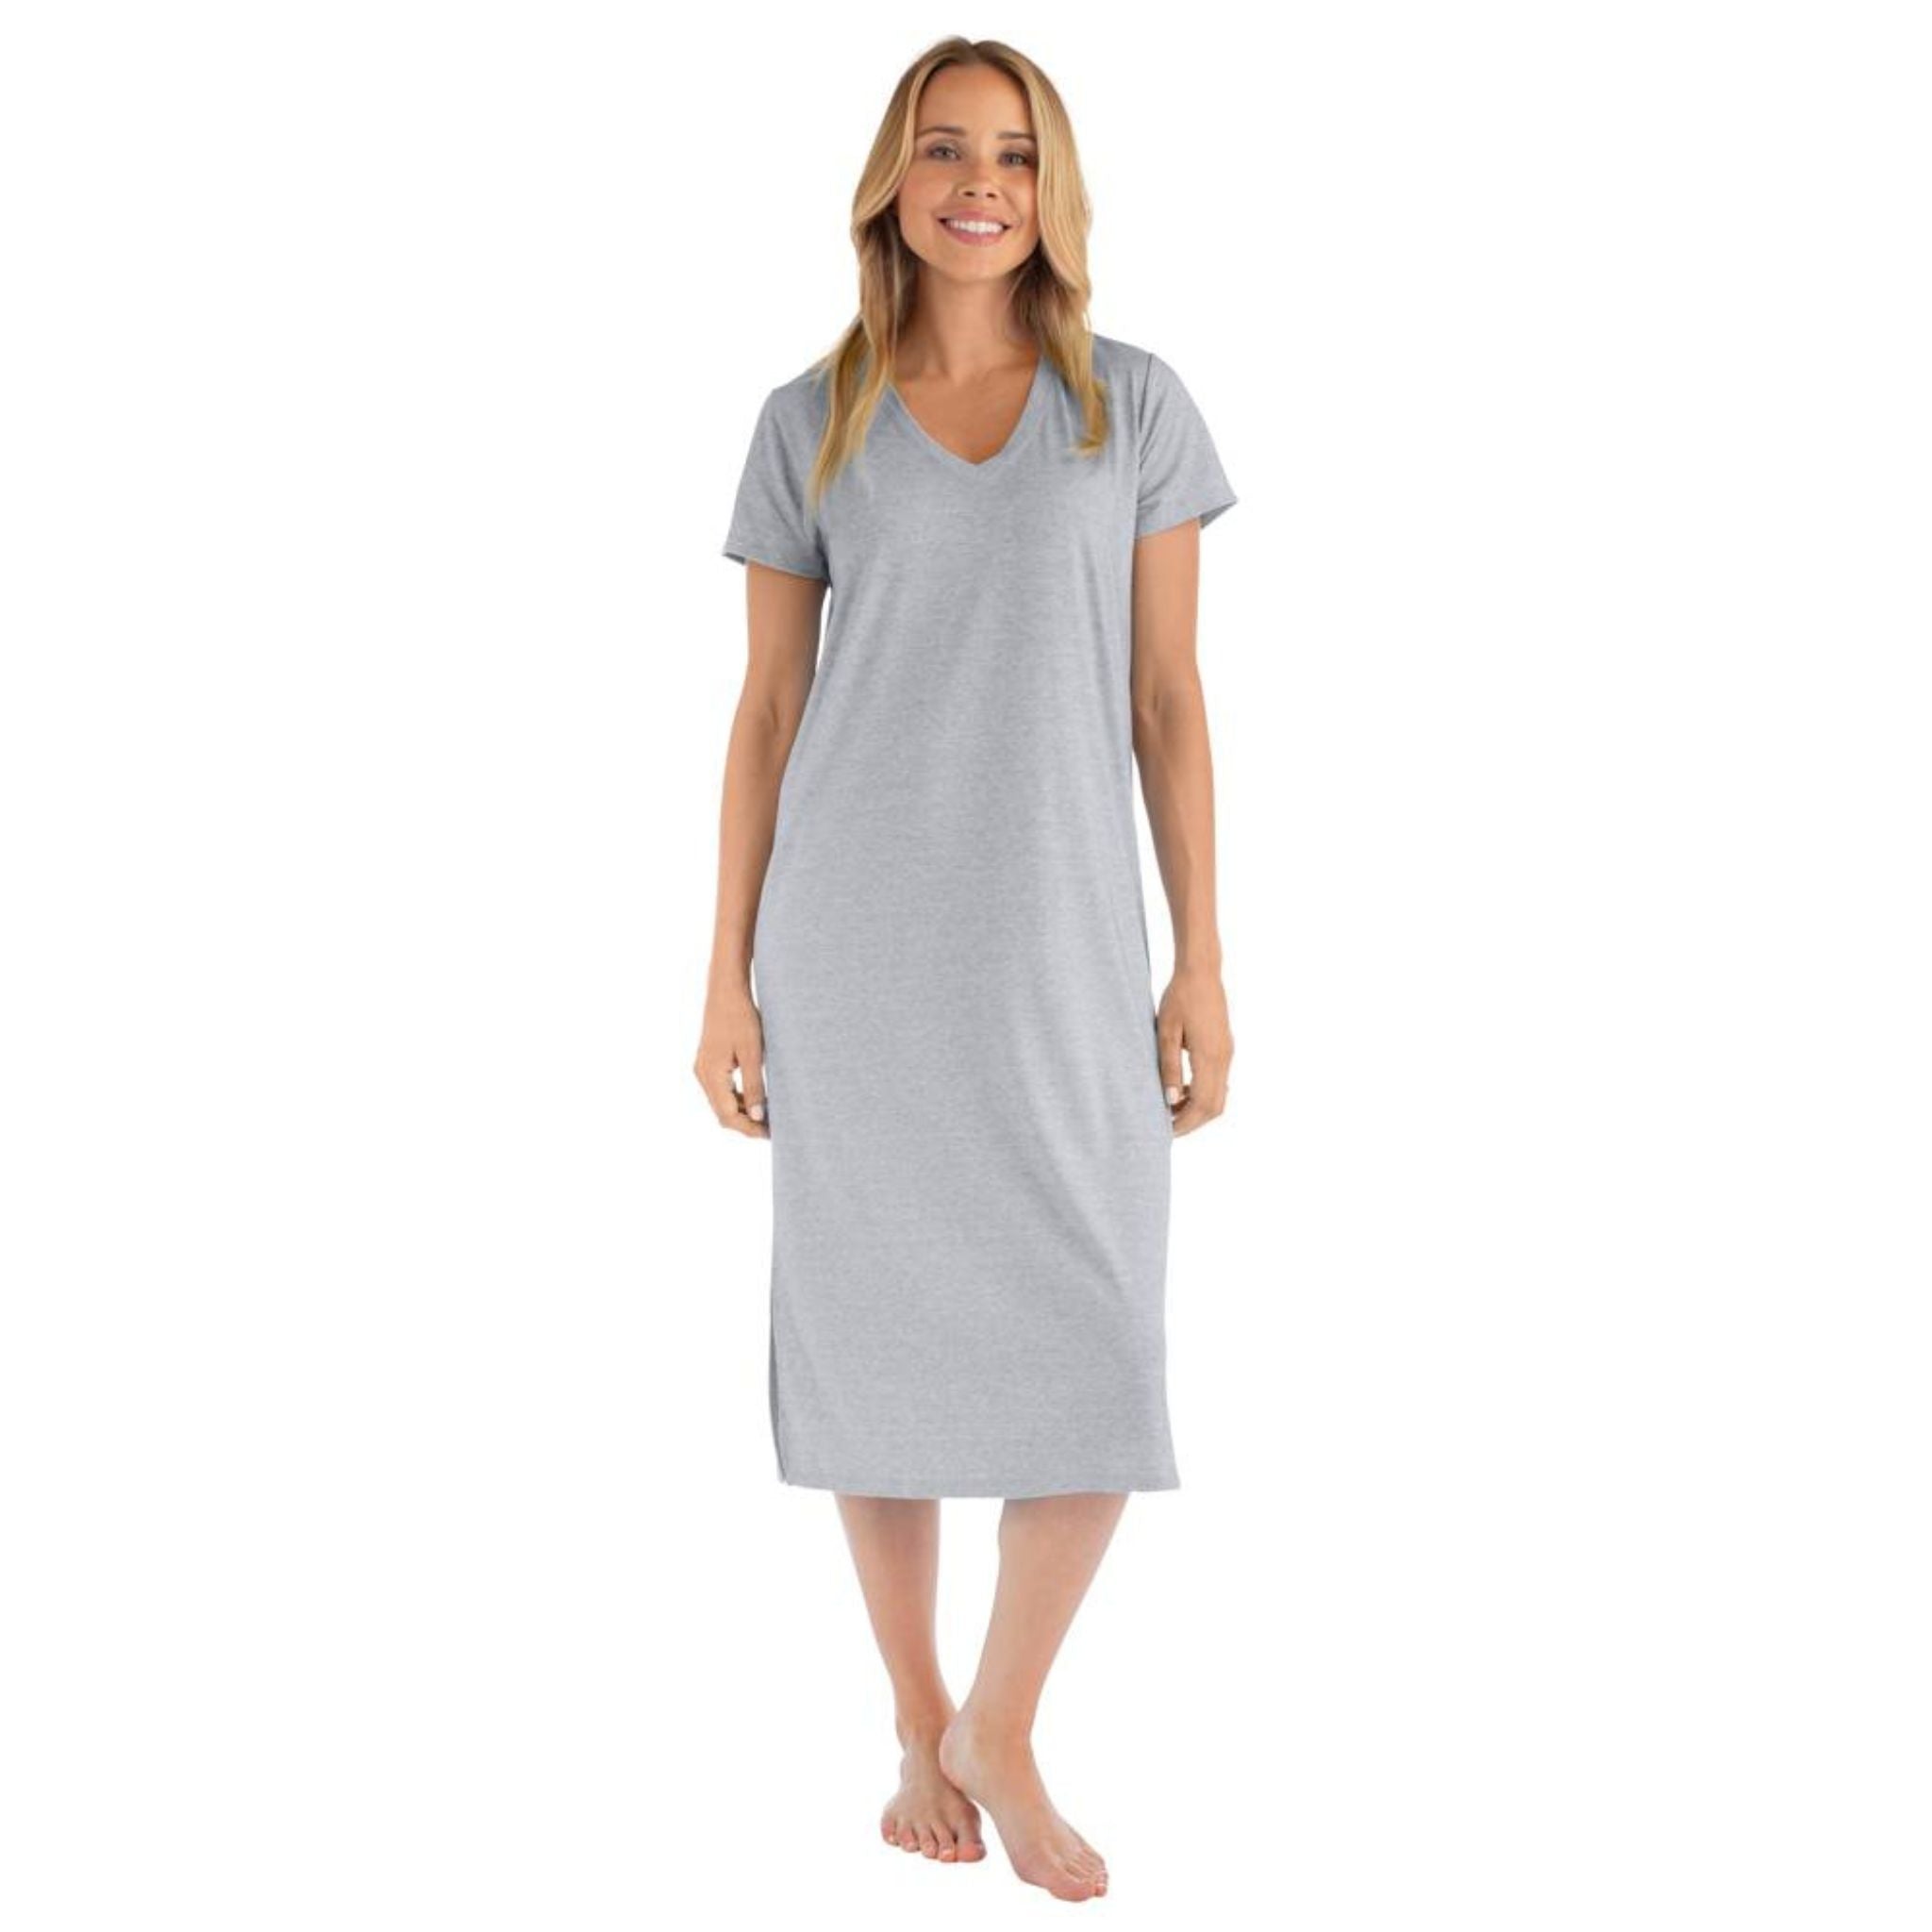 Your go-to sleep essential, night after night. Softies’ Jennifer V-Neck nightgown is incredibly effortless, soft, and lightweight. Made from our temperature regulatingDri-release® knit fabric, this relaxed, short-sleeve nightgown keeps you cool and comfortable wash after wash. It features a flowy fit and flattering side slits for maximum comfort.